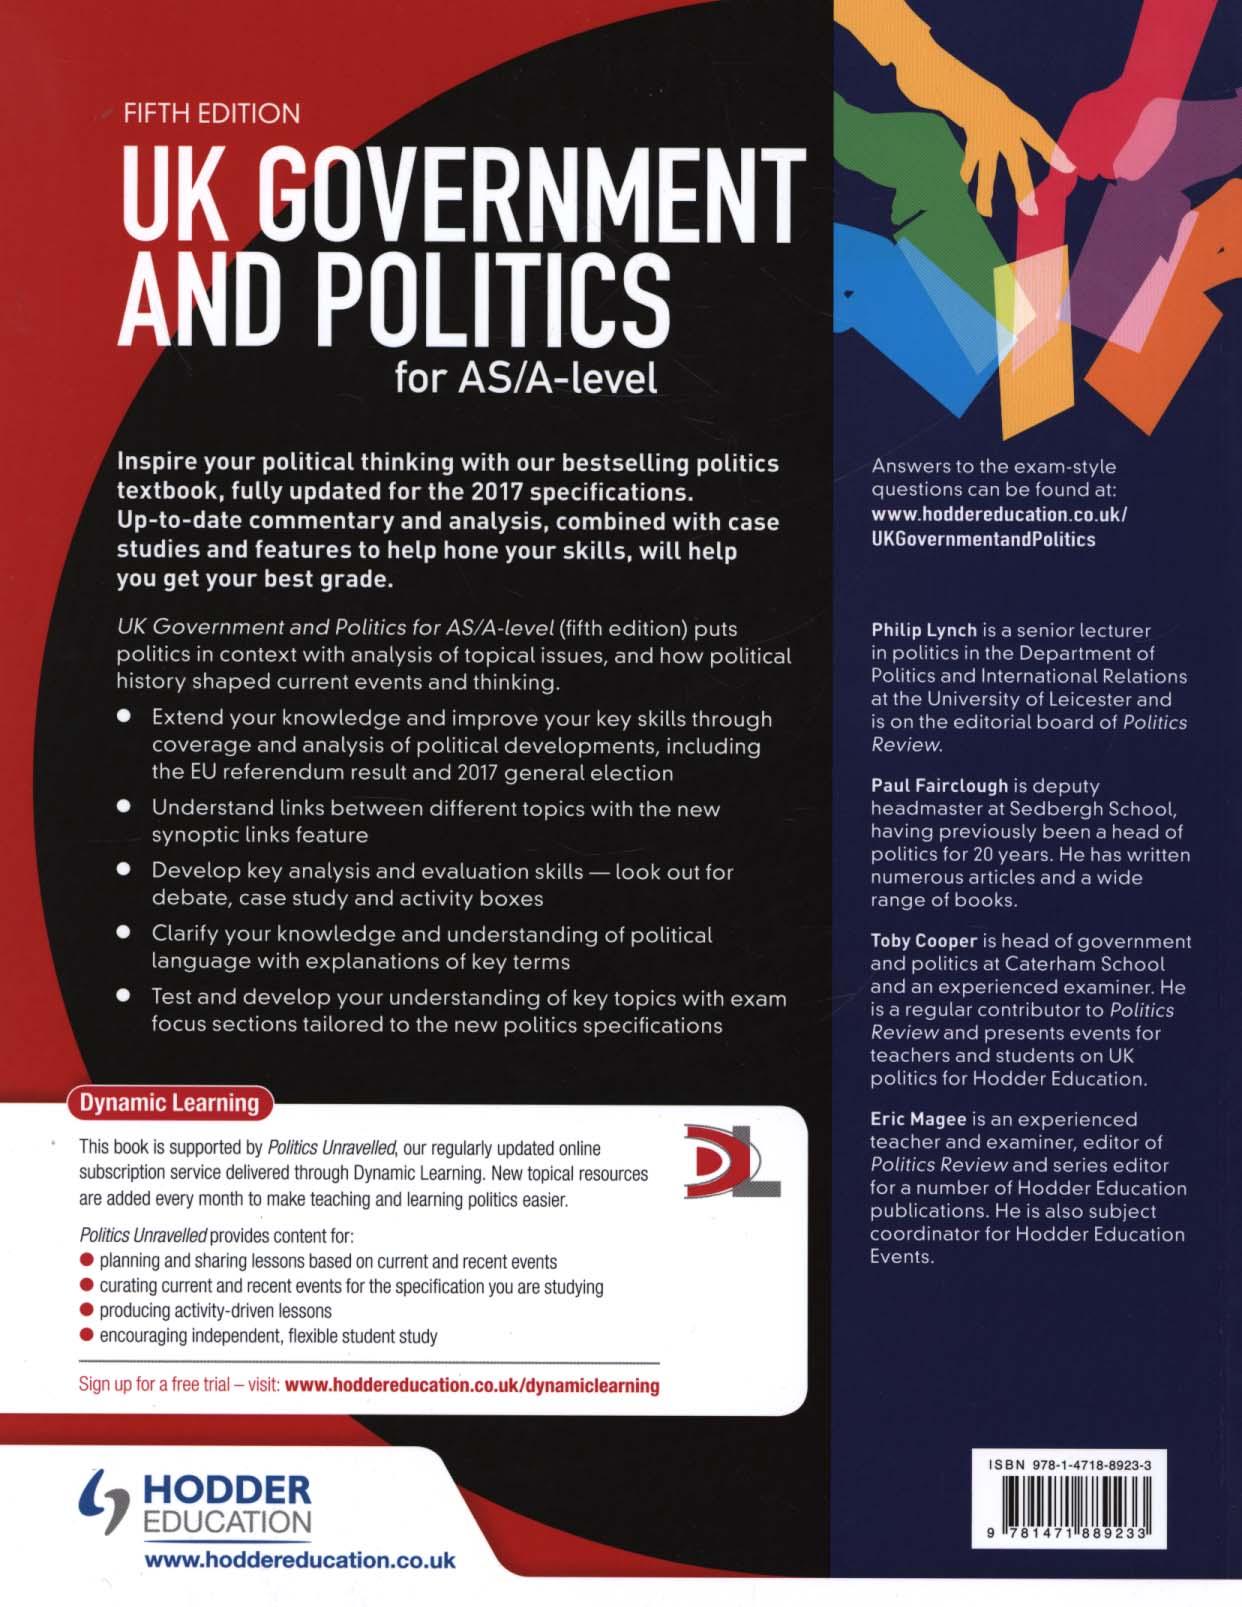 UK Government and Political Participation for AS/A Level